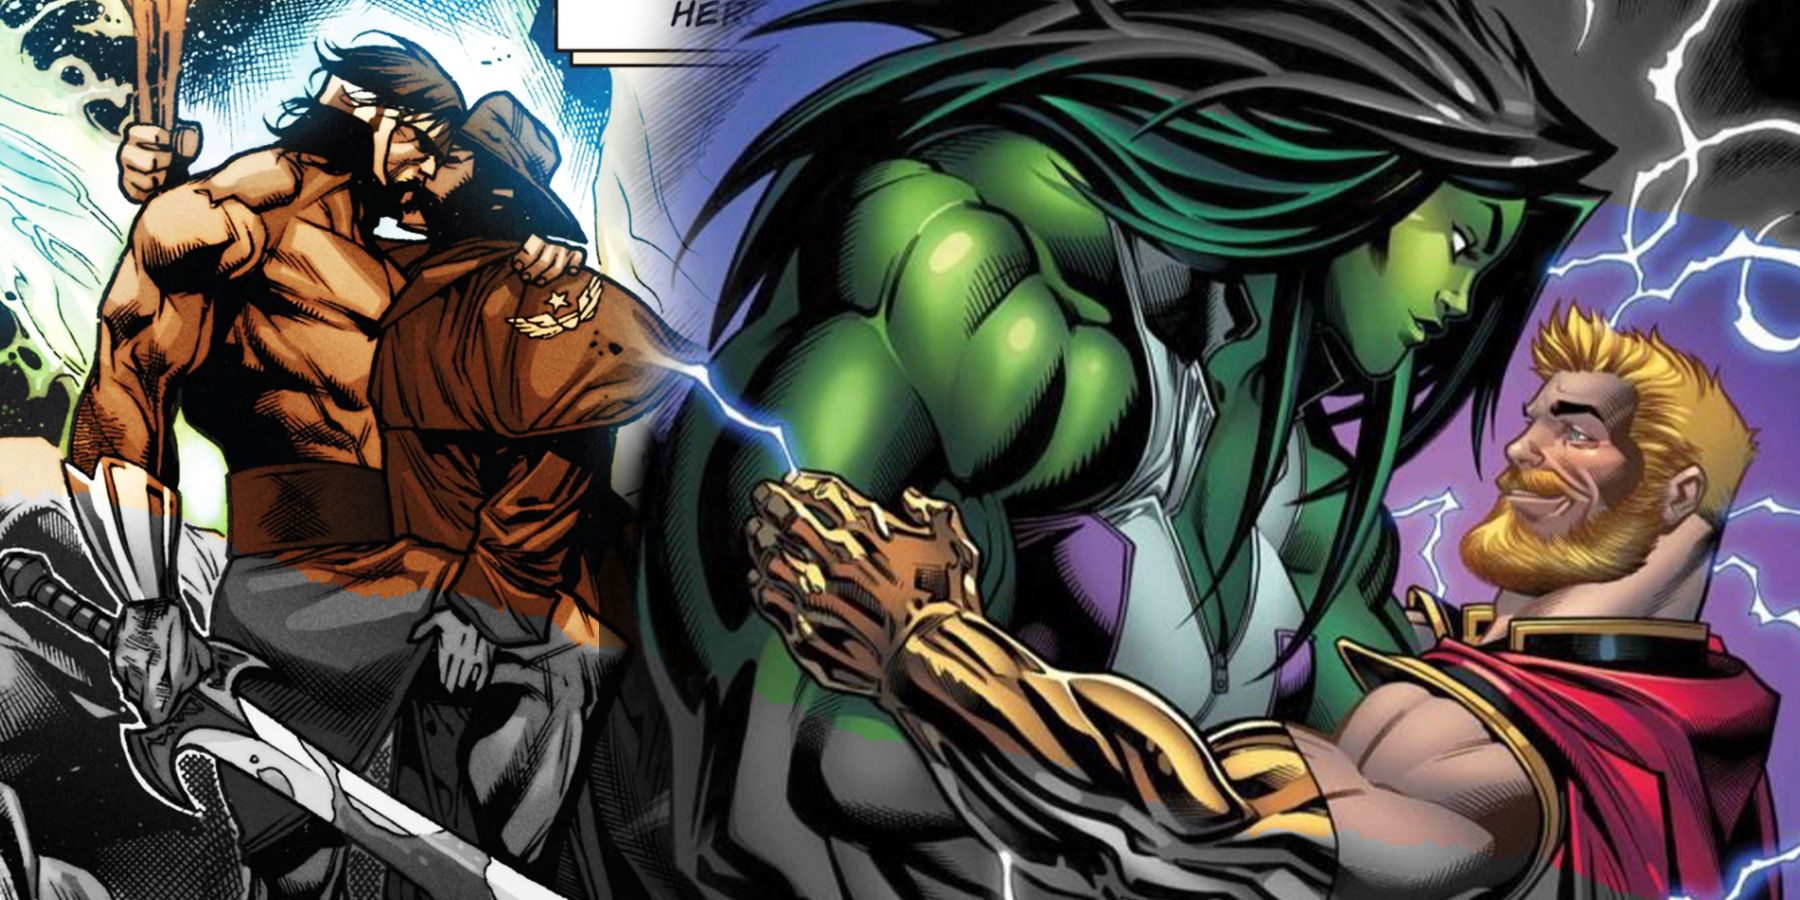 On the left, Wolverine and Hercules wrap their arms around each other amongst the remnants of a recent battle. On the right, She-Hulk and Thor are wrapped in each others arms, smiling affectionately at one another.